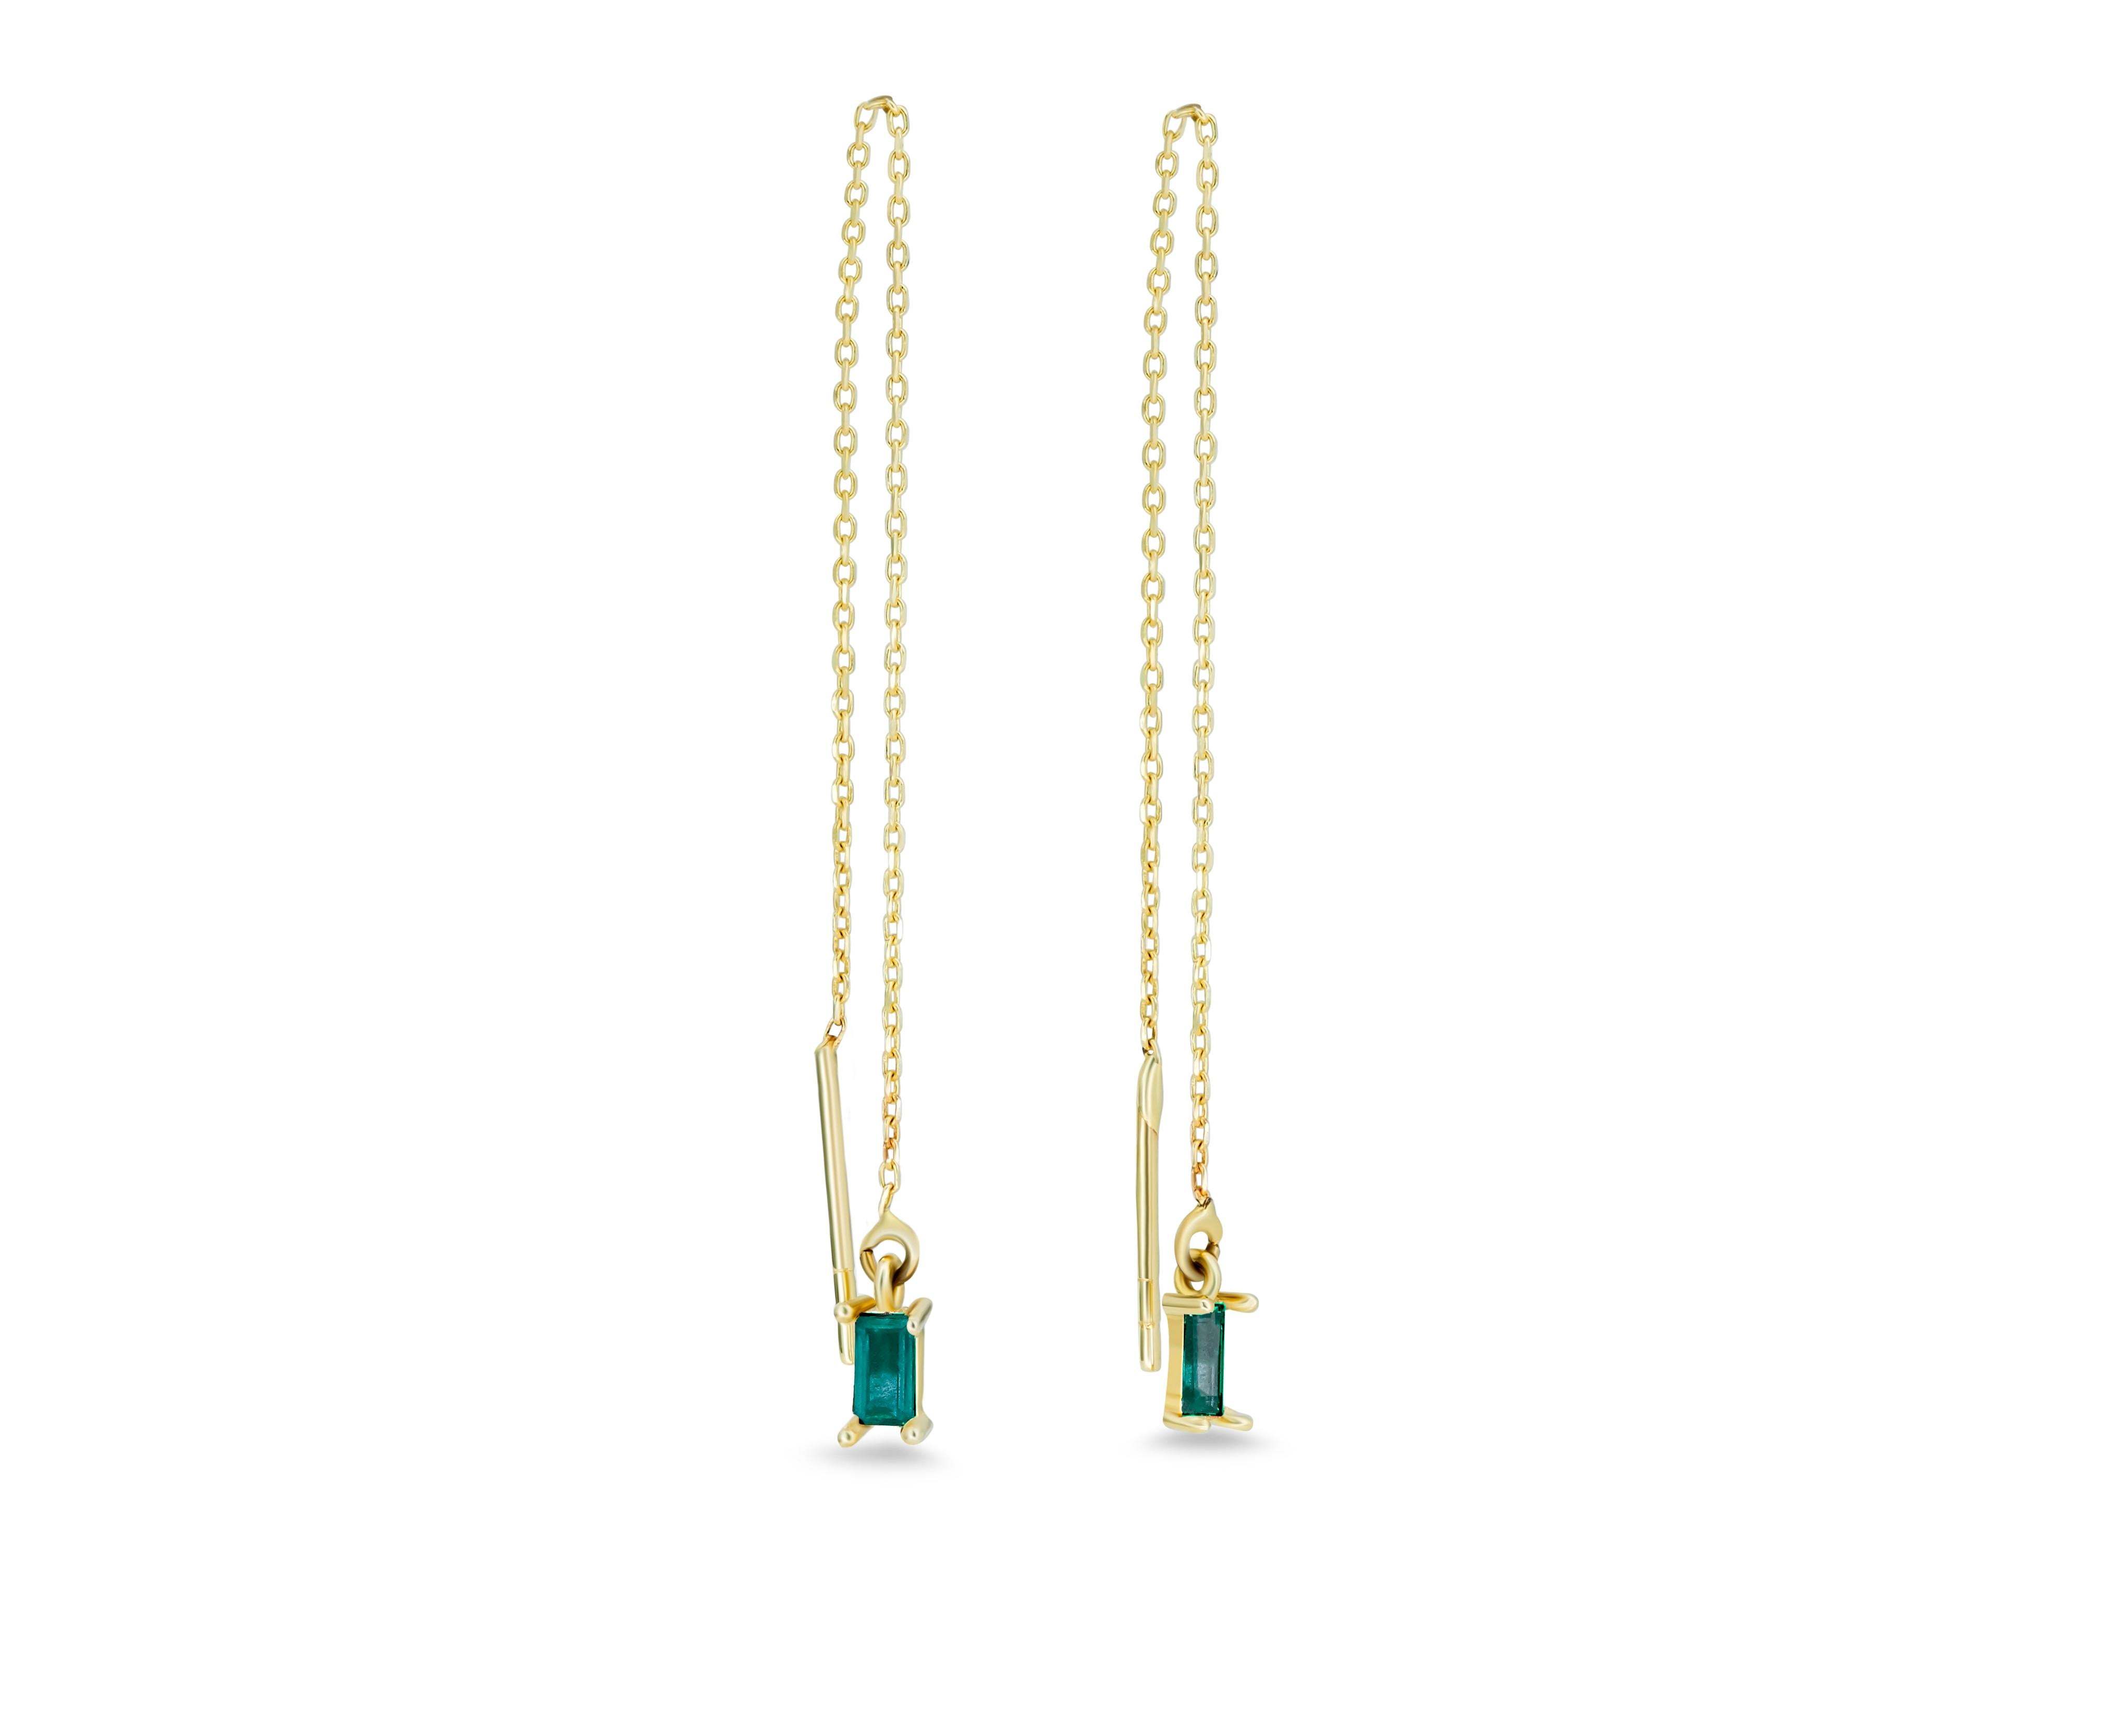 14k Solid Gold Drop Earrings with emerald. 
Chain Gold Earrings. Emerald Drop Gold Threaders. Emerald gold earrings. Baguette earrings.

Metal: 14 karat gold
Weight: 0.8-0.9 g.
Size: 6.5-6.8 sm.

Central stones: Natural emeralds 2 pieces
Cut: